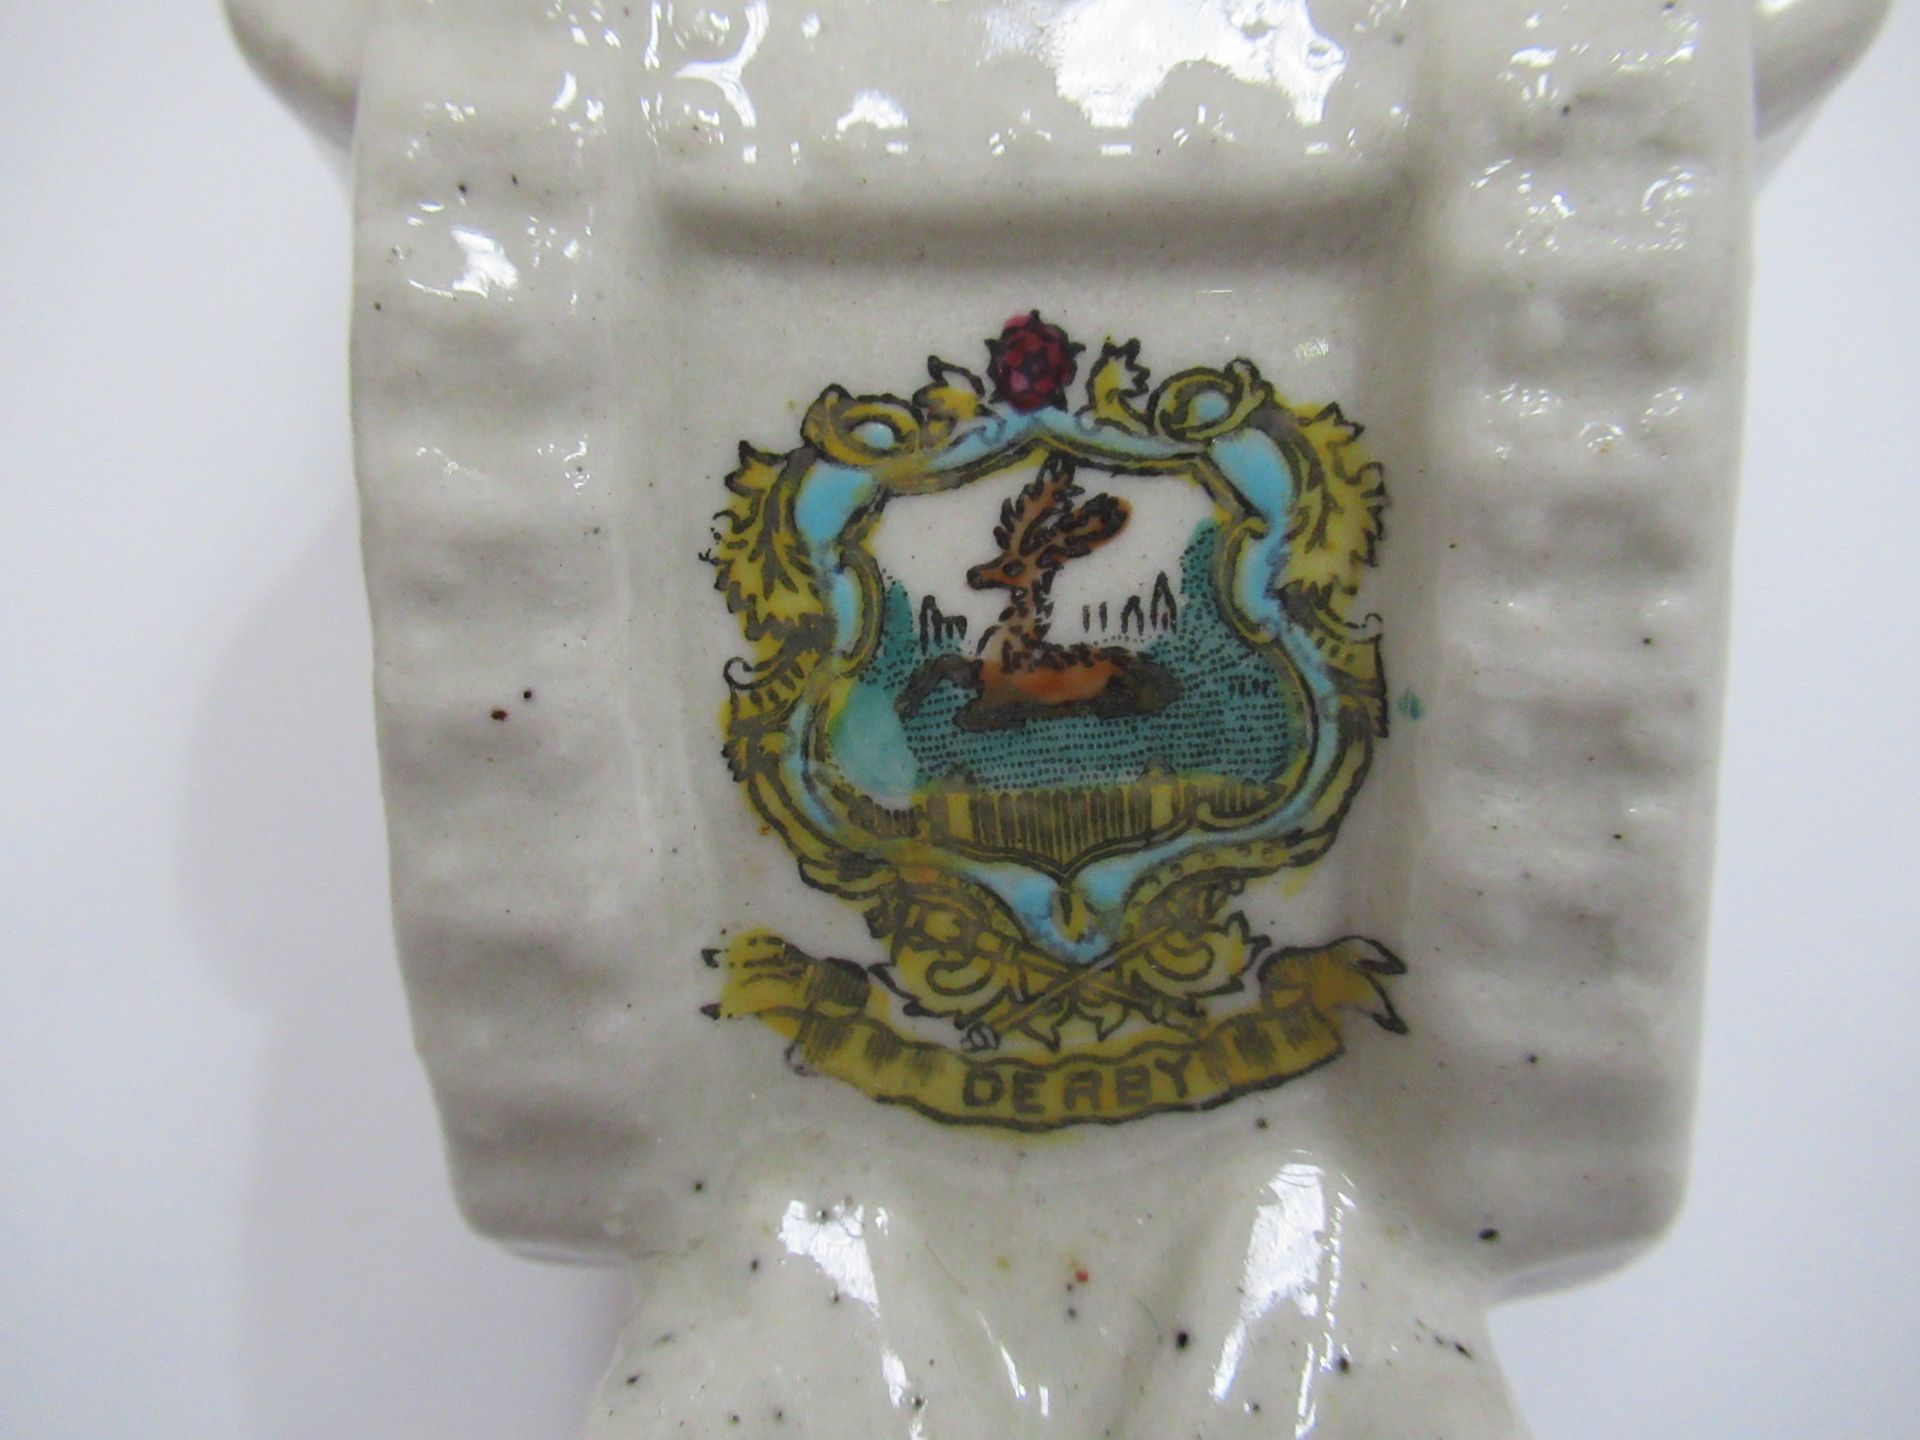 Crested China Willow art 'model of British Tank' with Derby coat of arms (130mm x 75mm) - Image 6 of 10